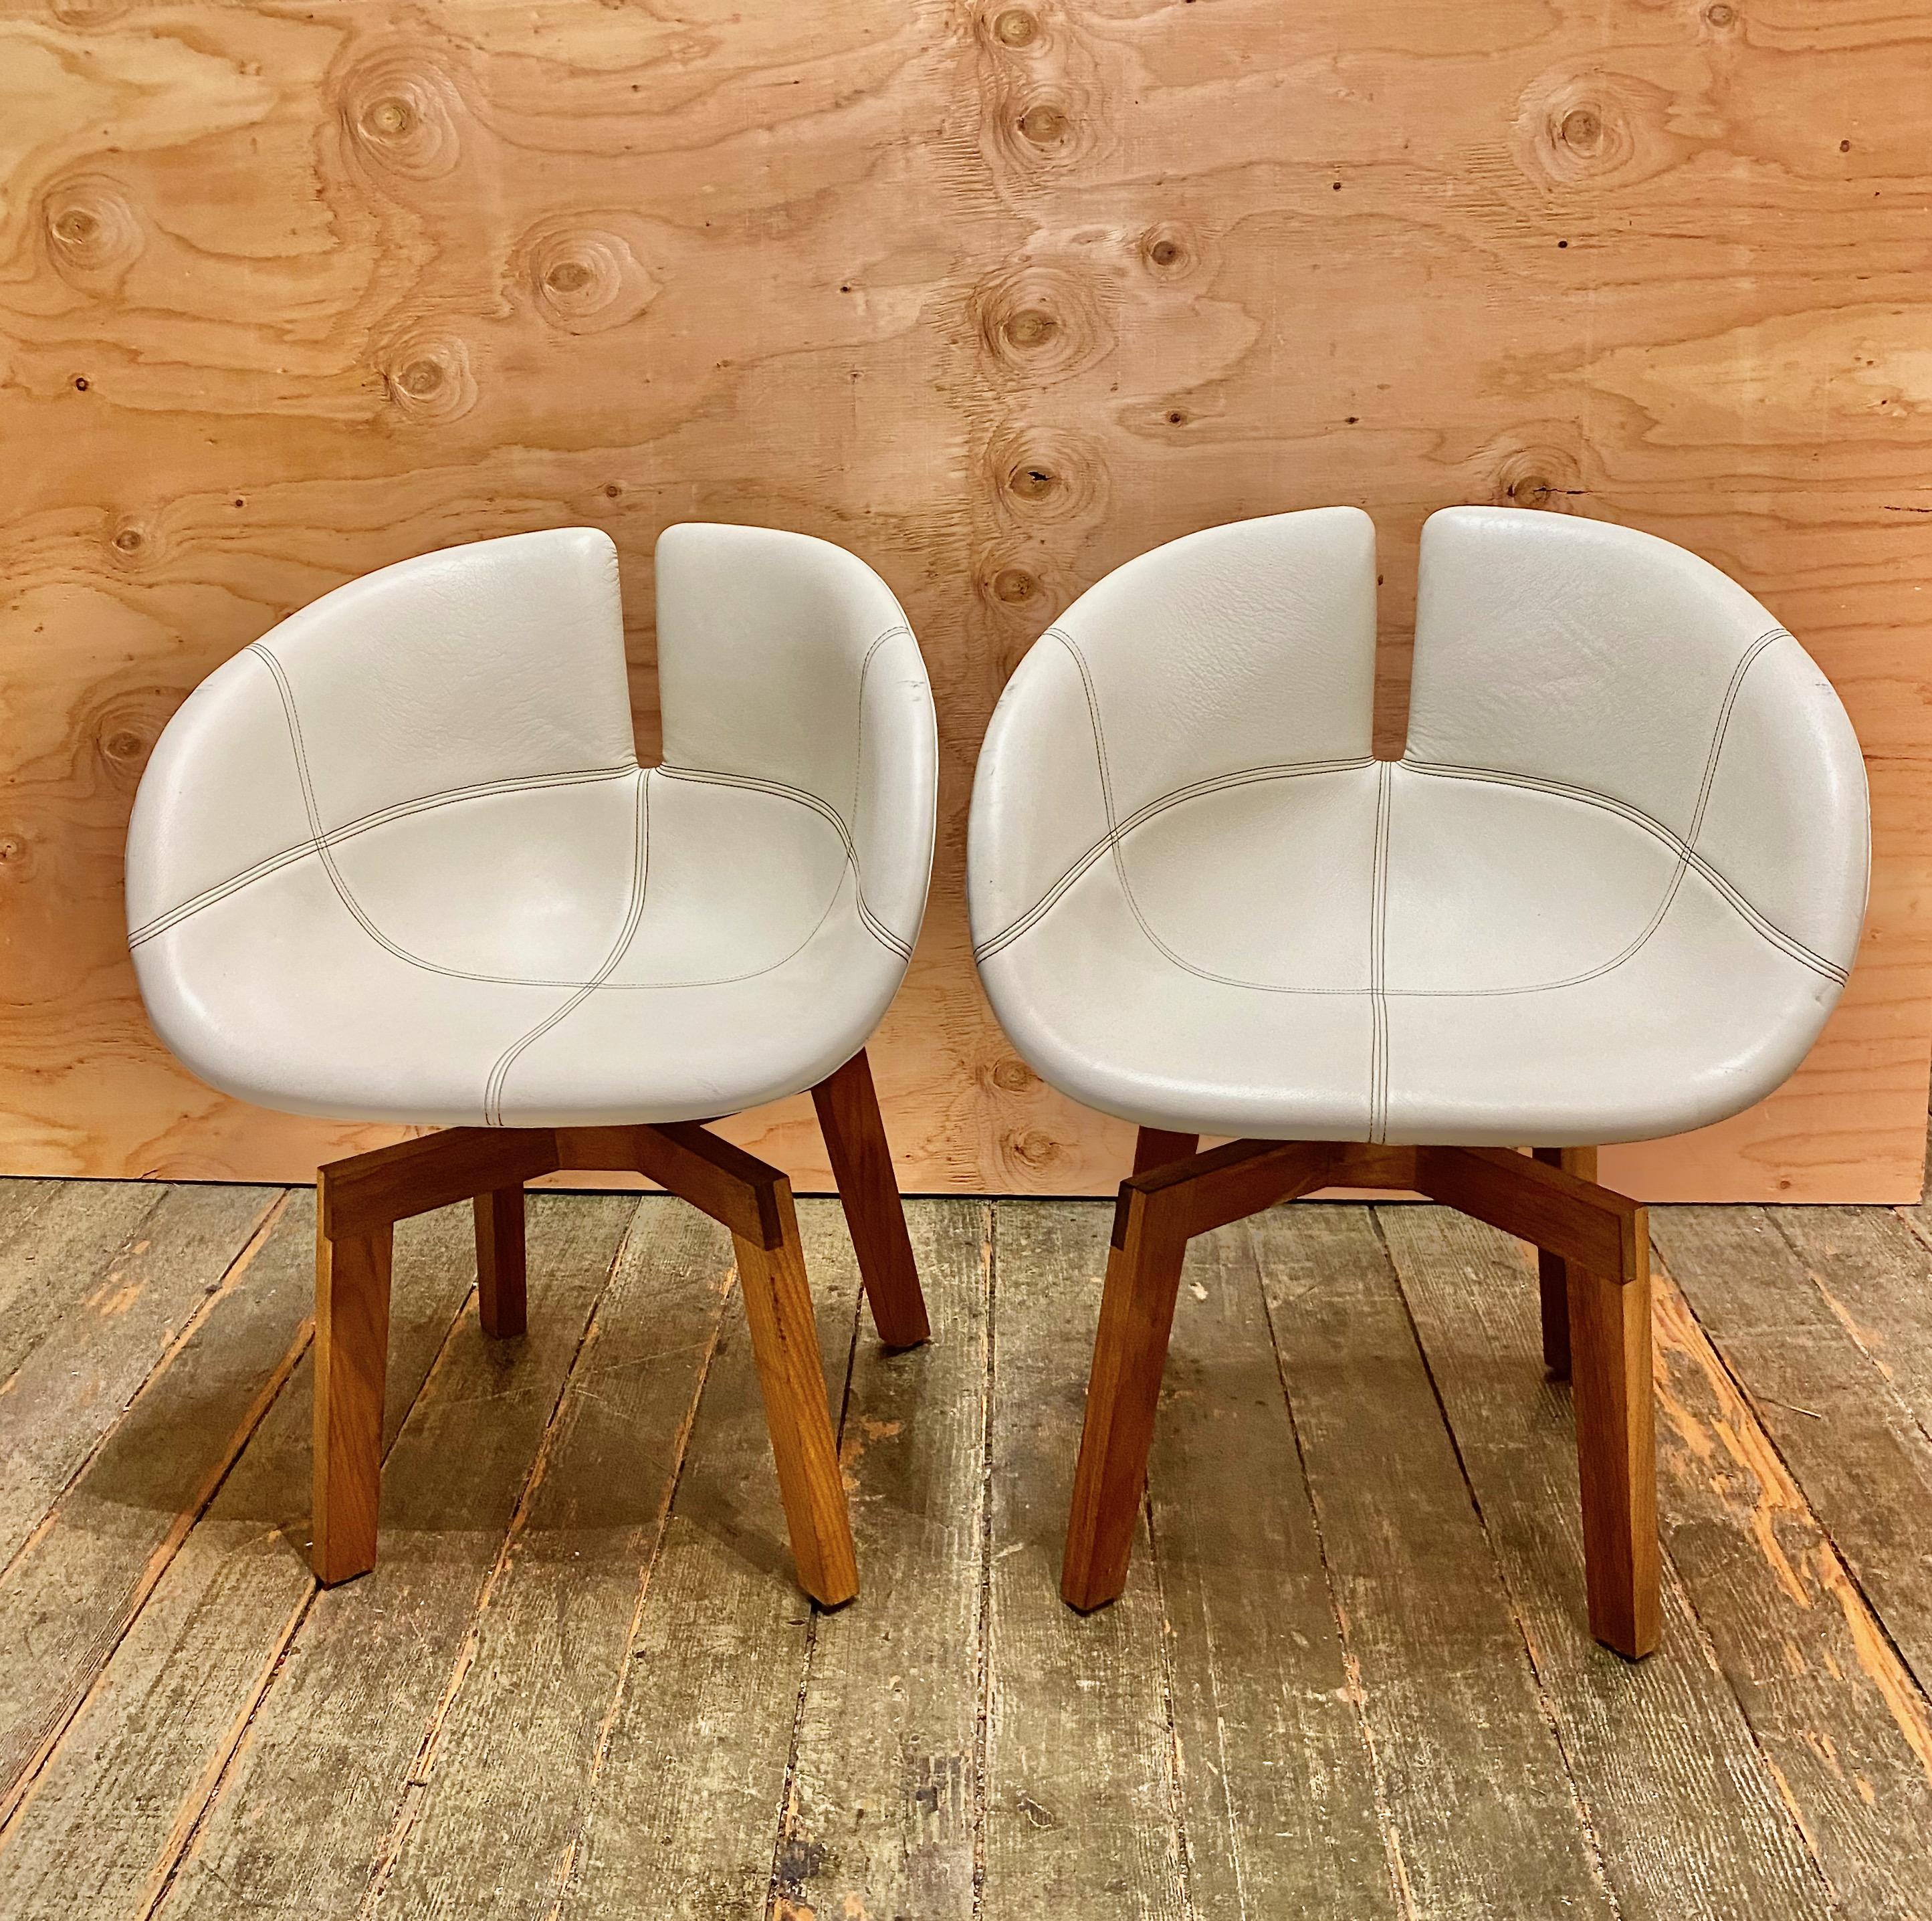 These chairswere fabricated in Italy by the recognized Moroso factory to the designs of the recognized Spanish designer, Patricia Urquiola. These particular examples are of the top level of this model and are fabricated with top grade over stitched